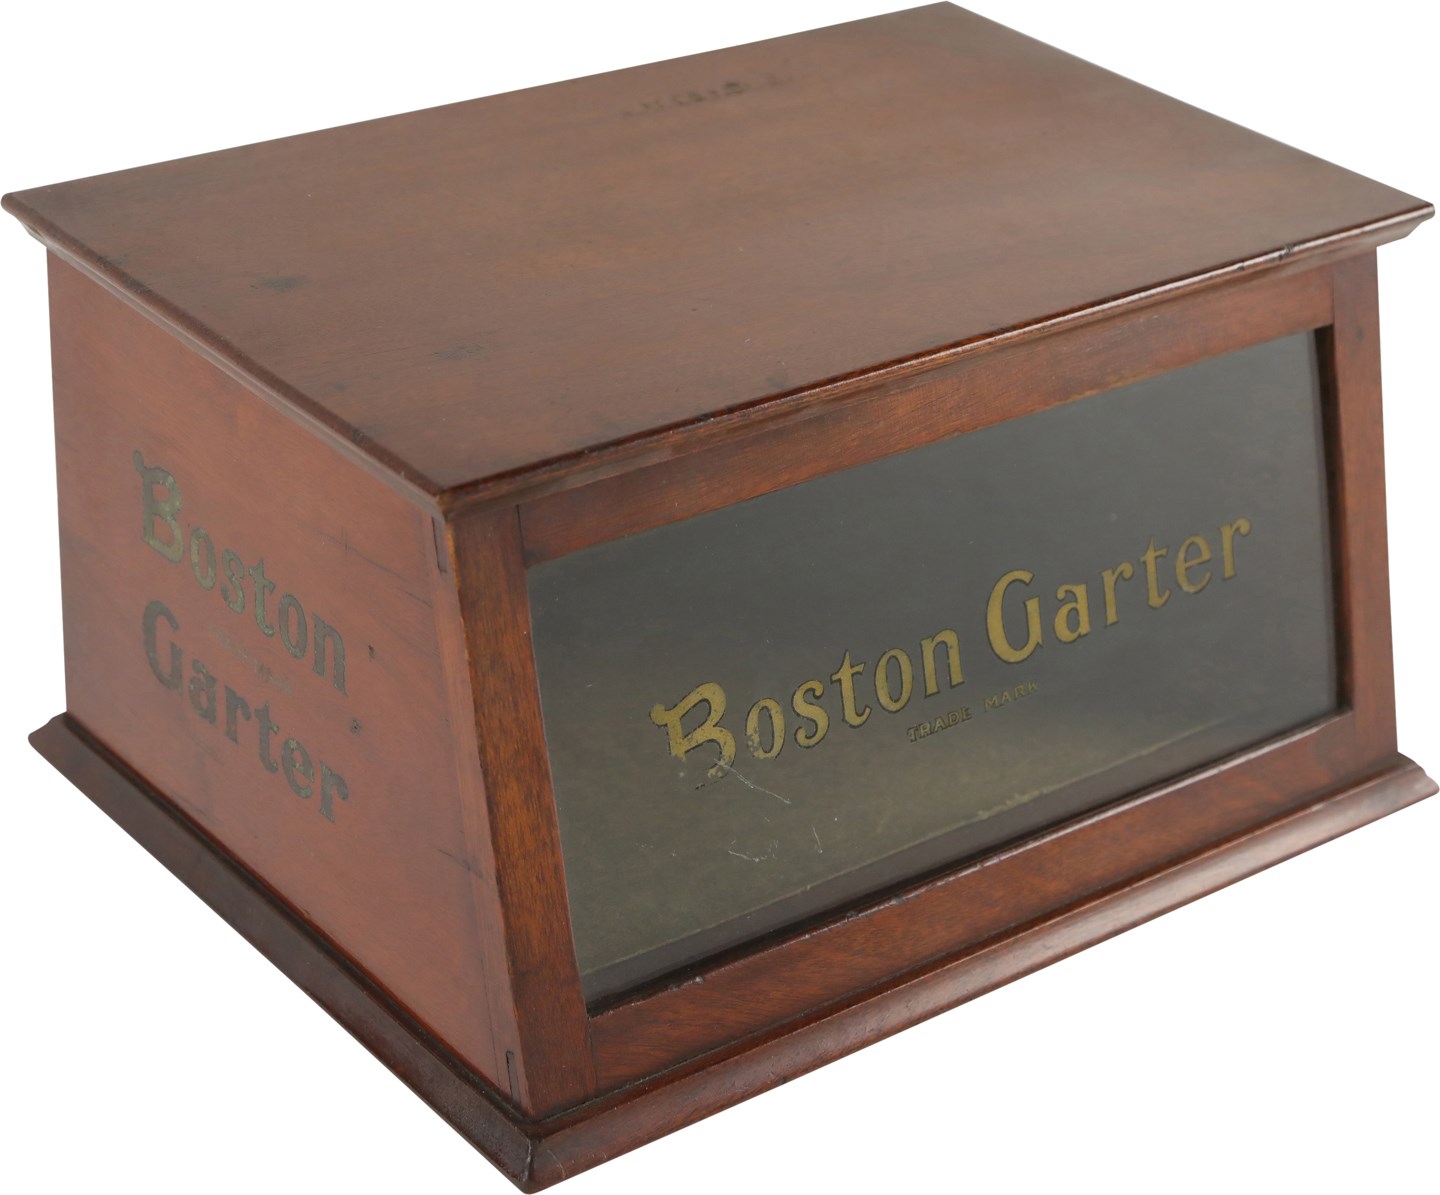 Baseball and Trading Cards - 1910s Boston Garter In-Store Advertising Display Case